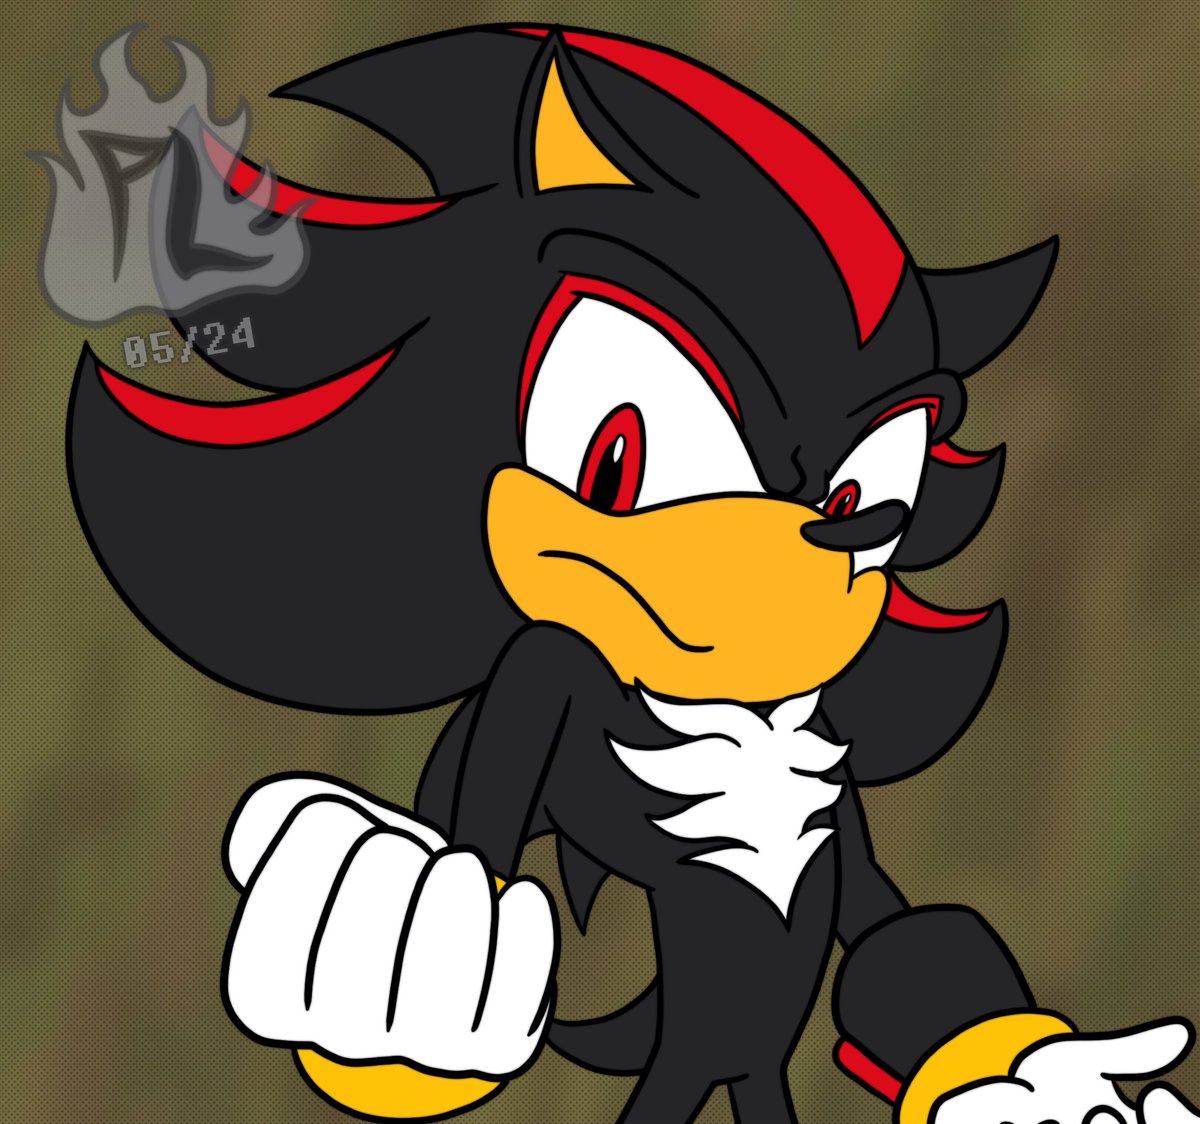 #ShadowFriday 15: Another redraw of a classic pose this week.